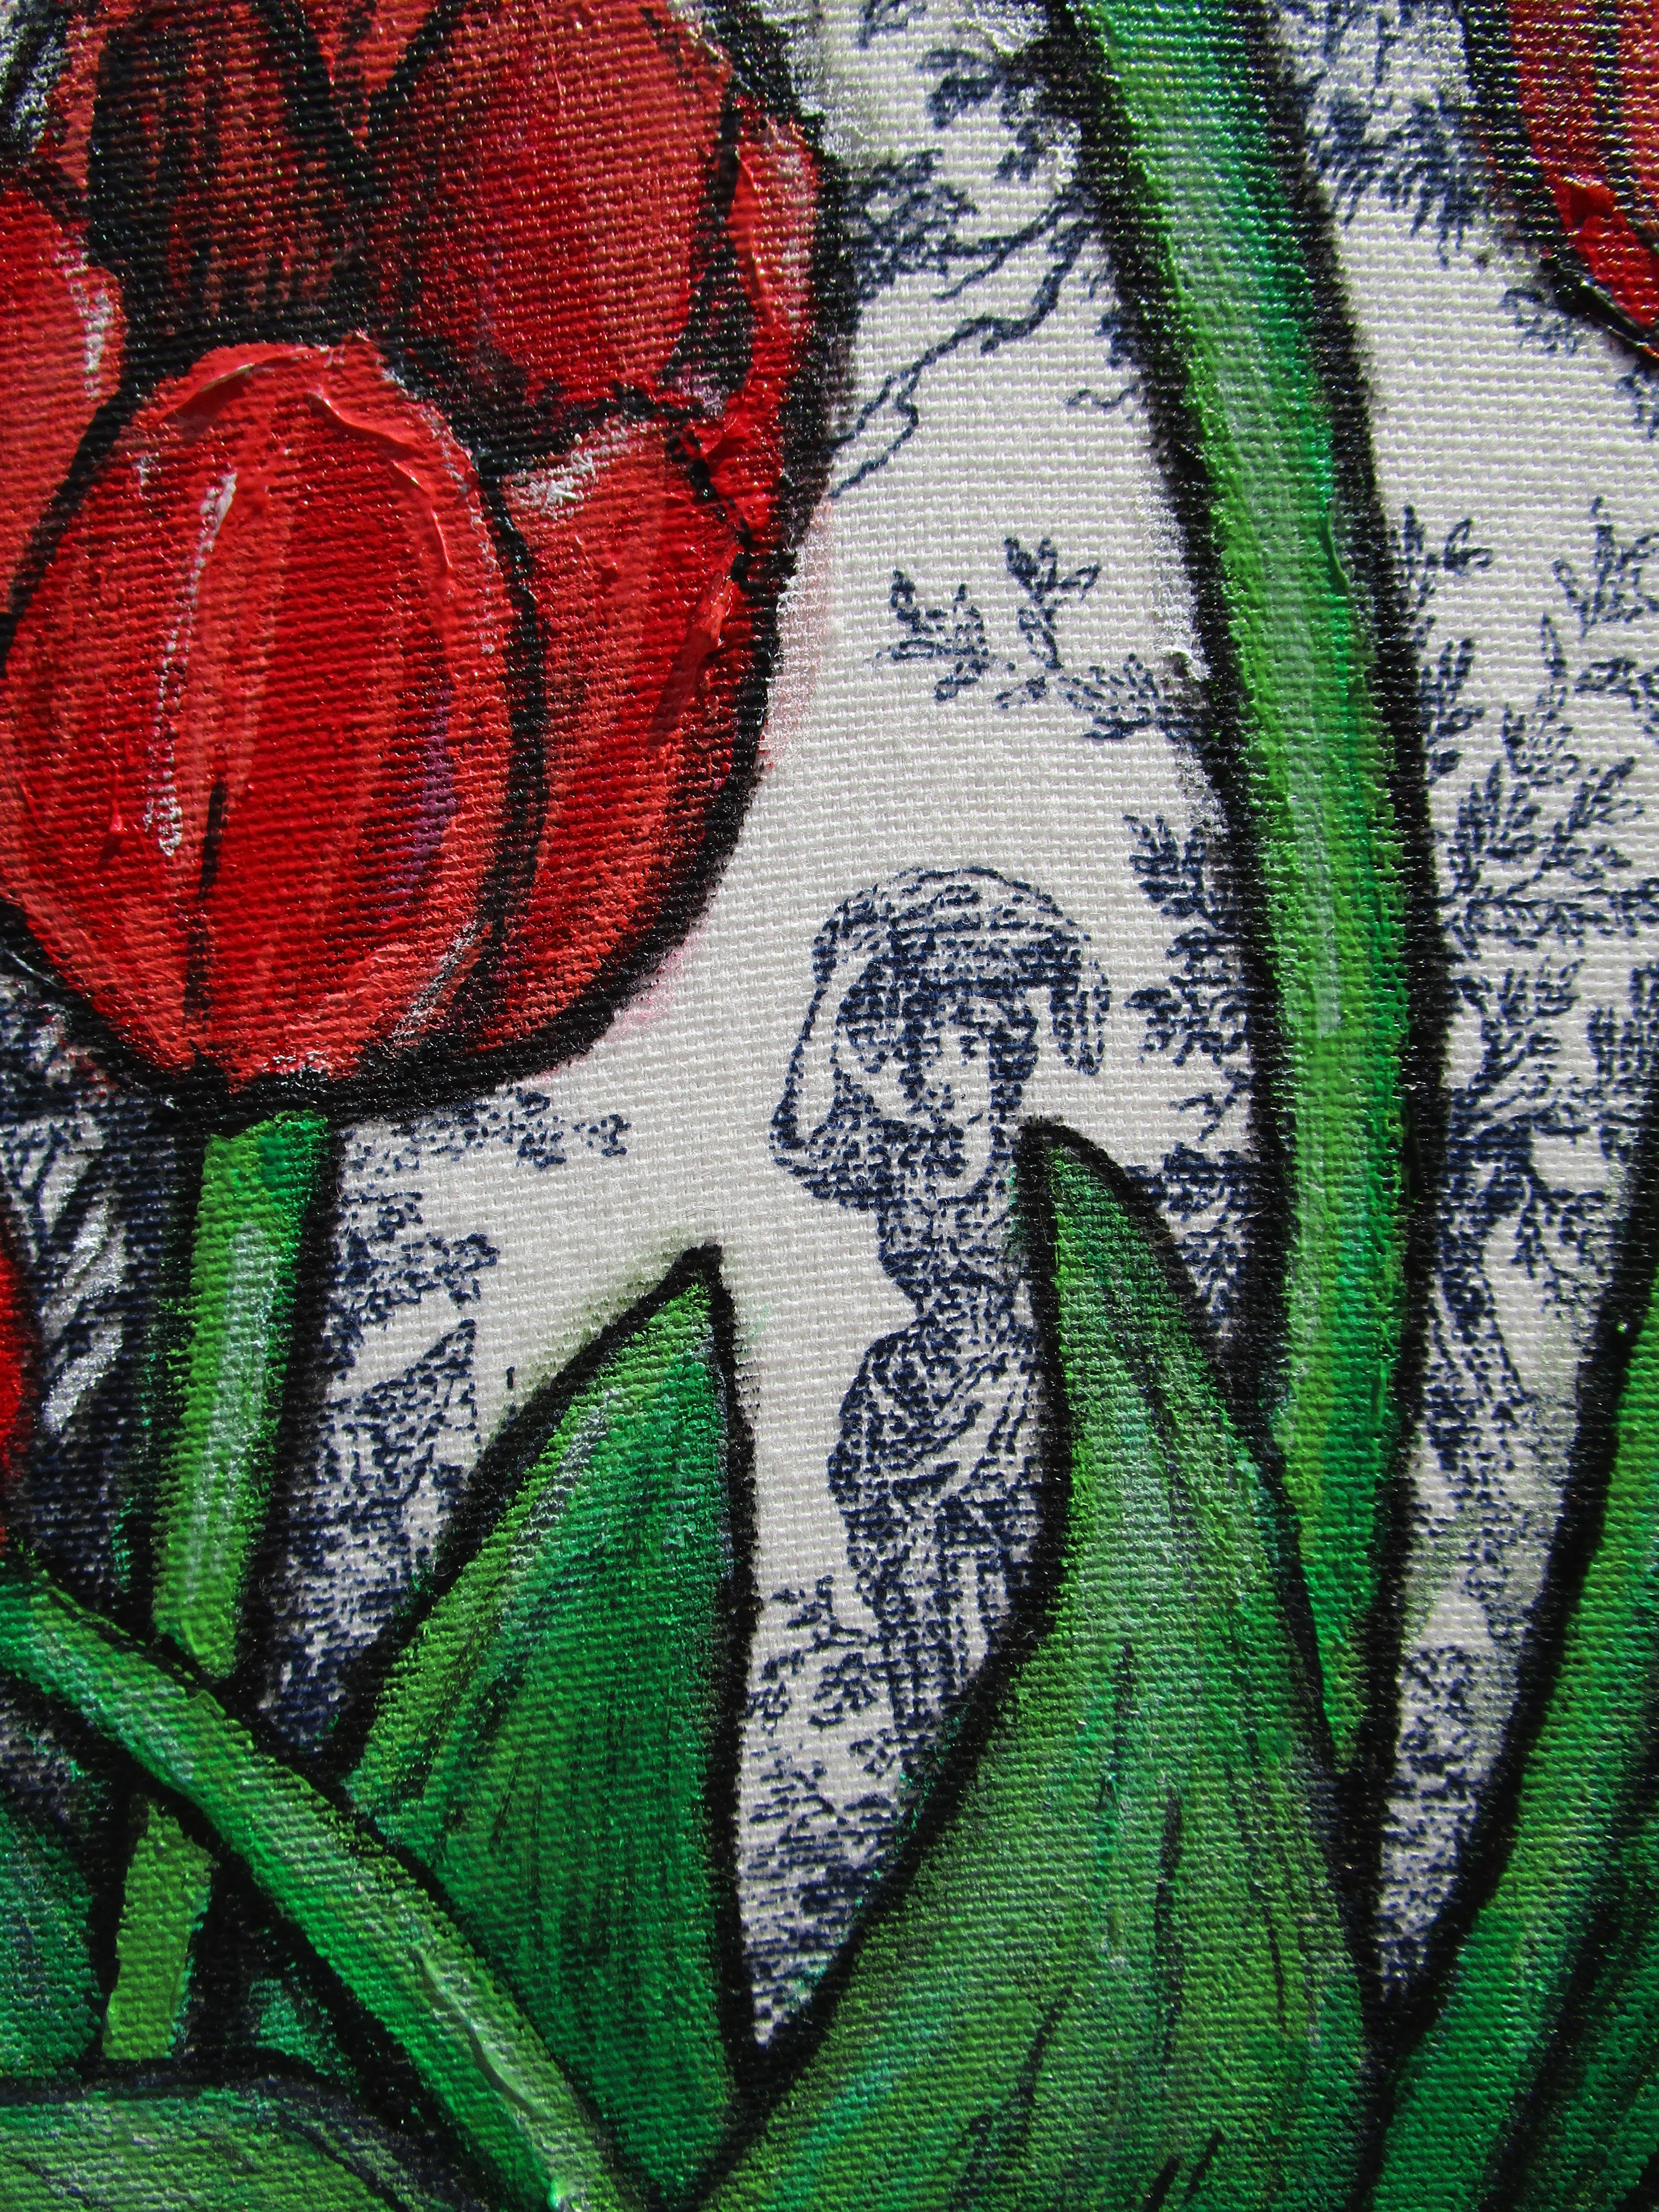 Red Tulips, Original Painting - Contemporary Art by Greg Angelone